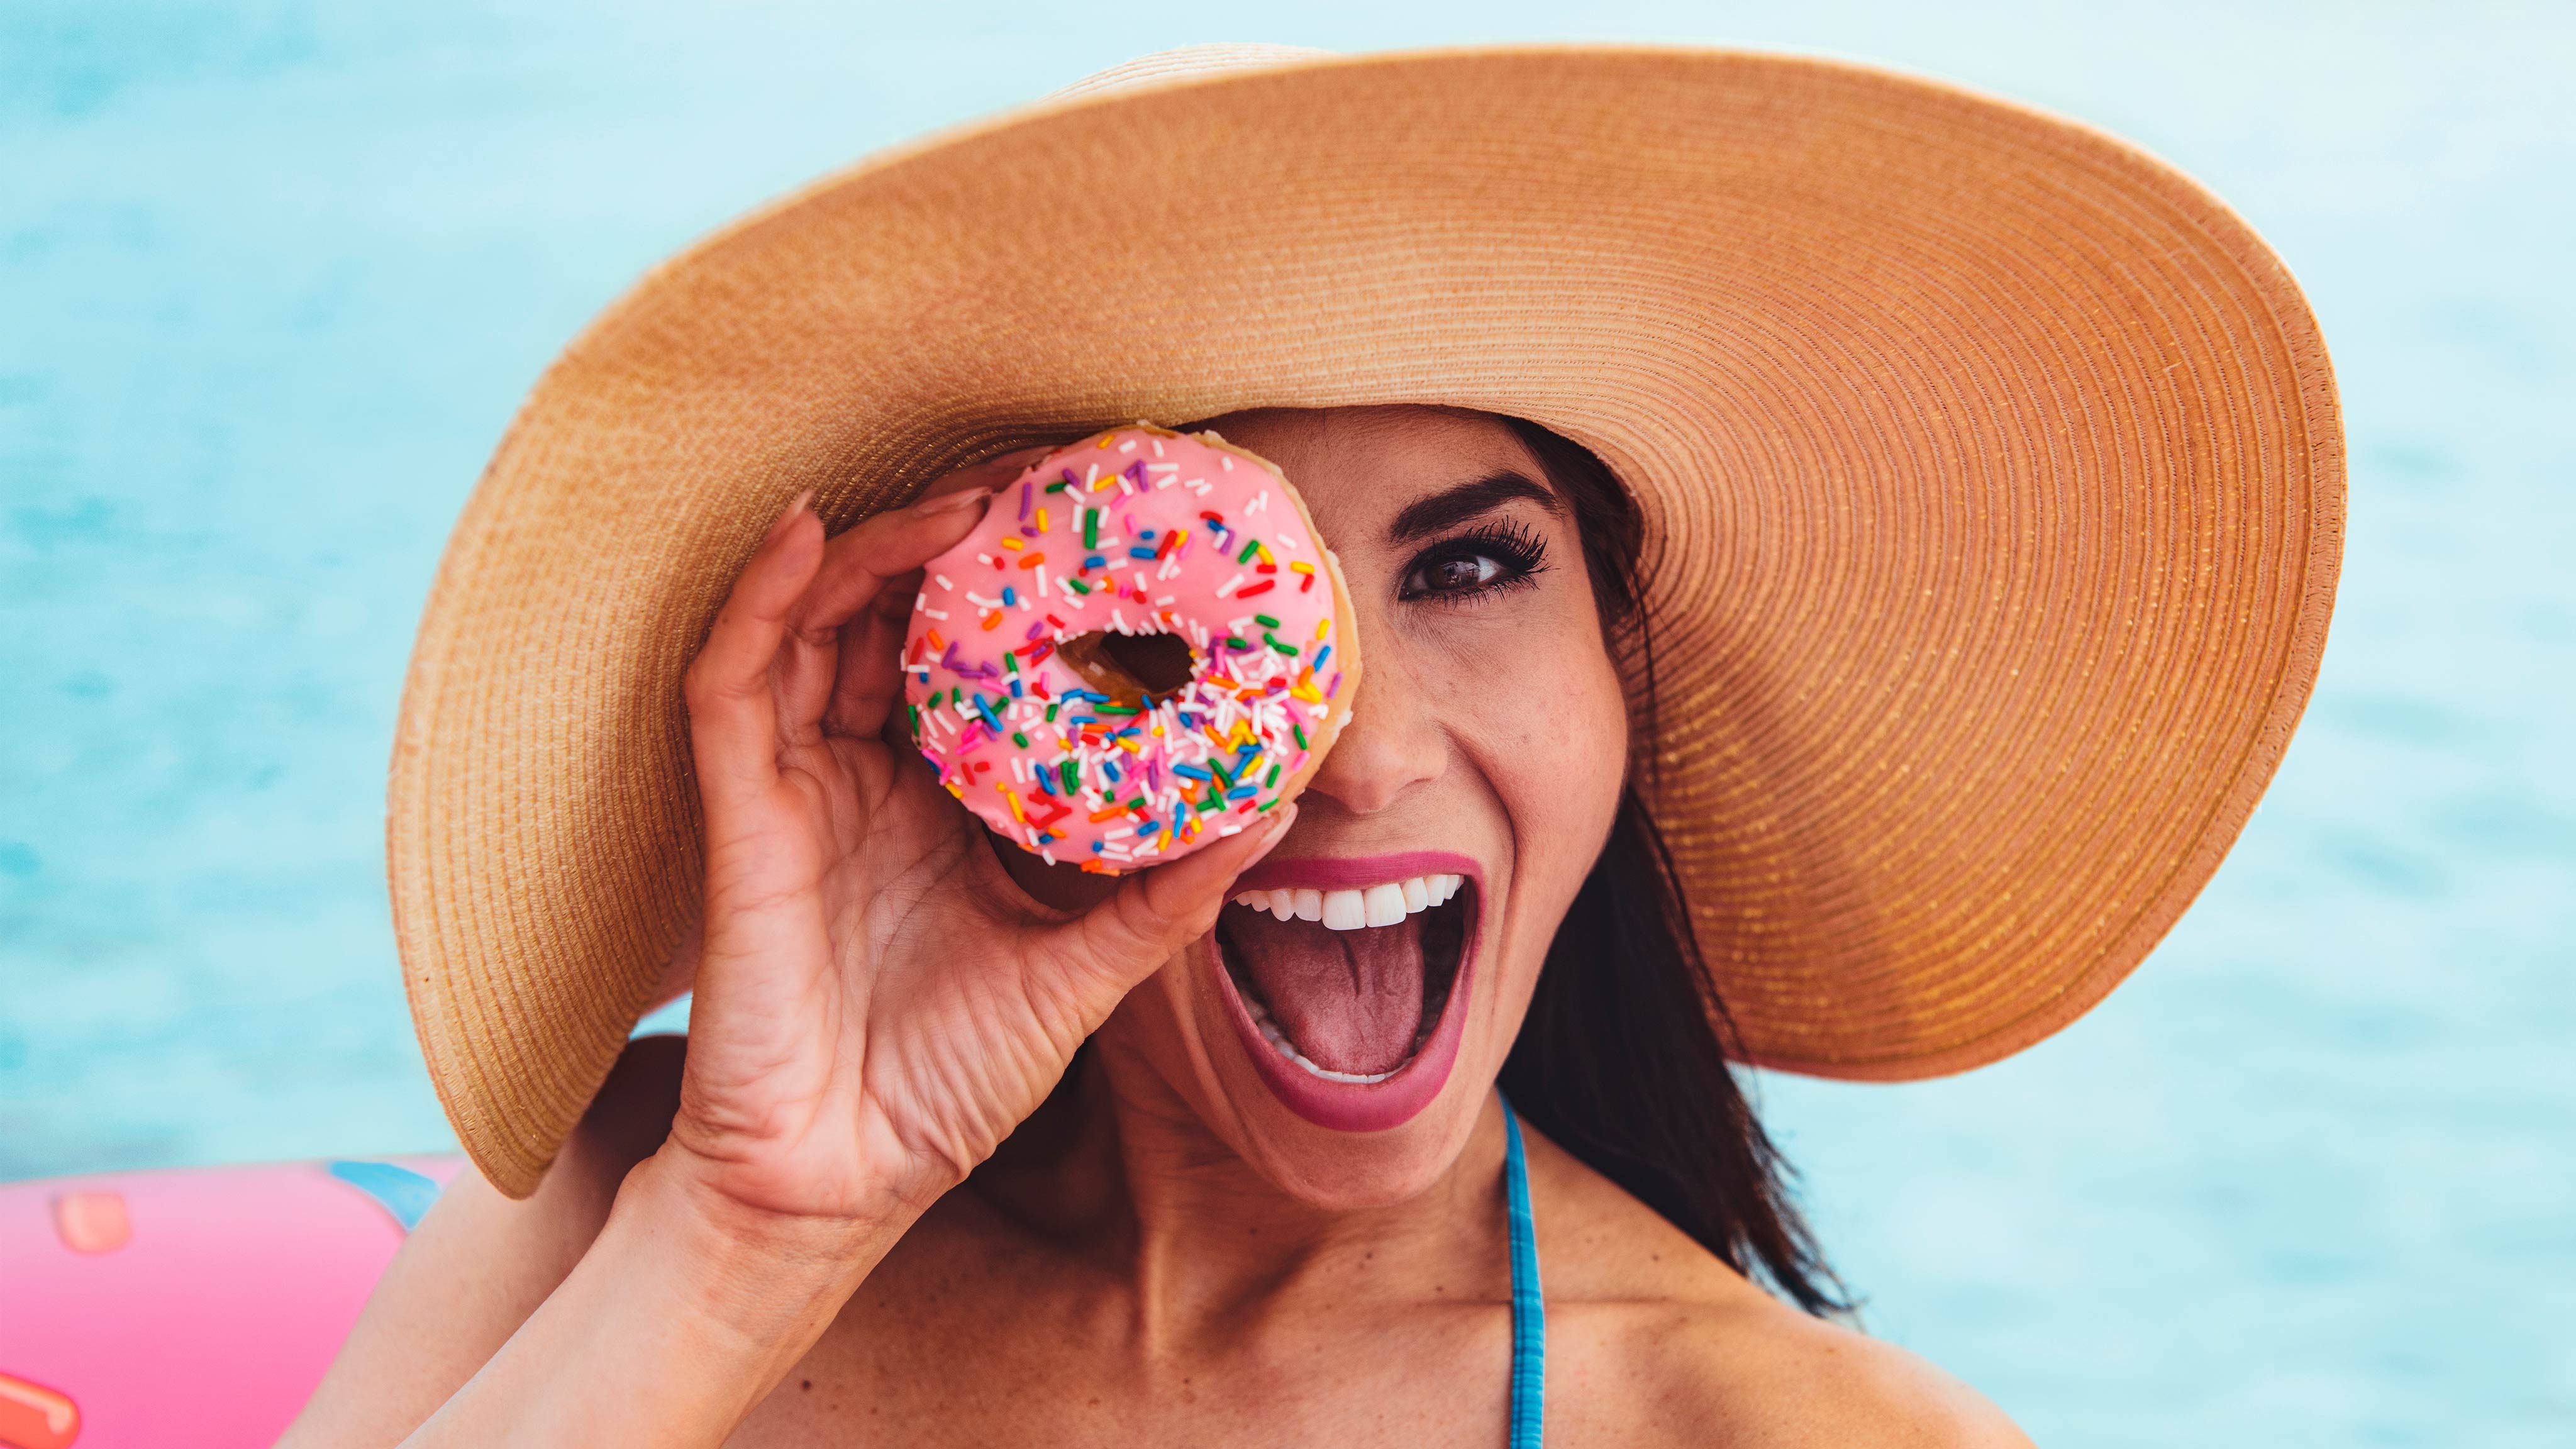 Woman smiling while holding a donut